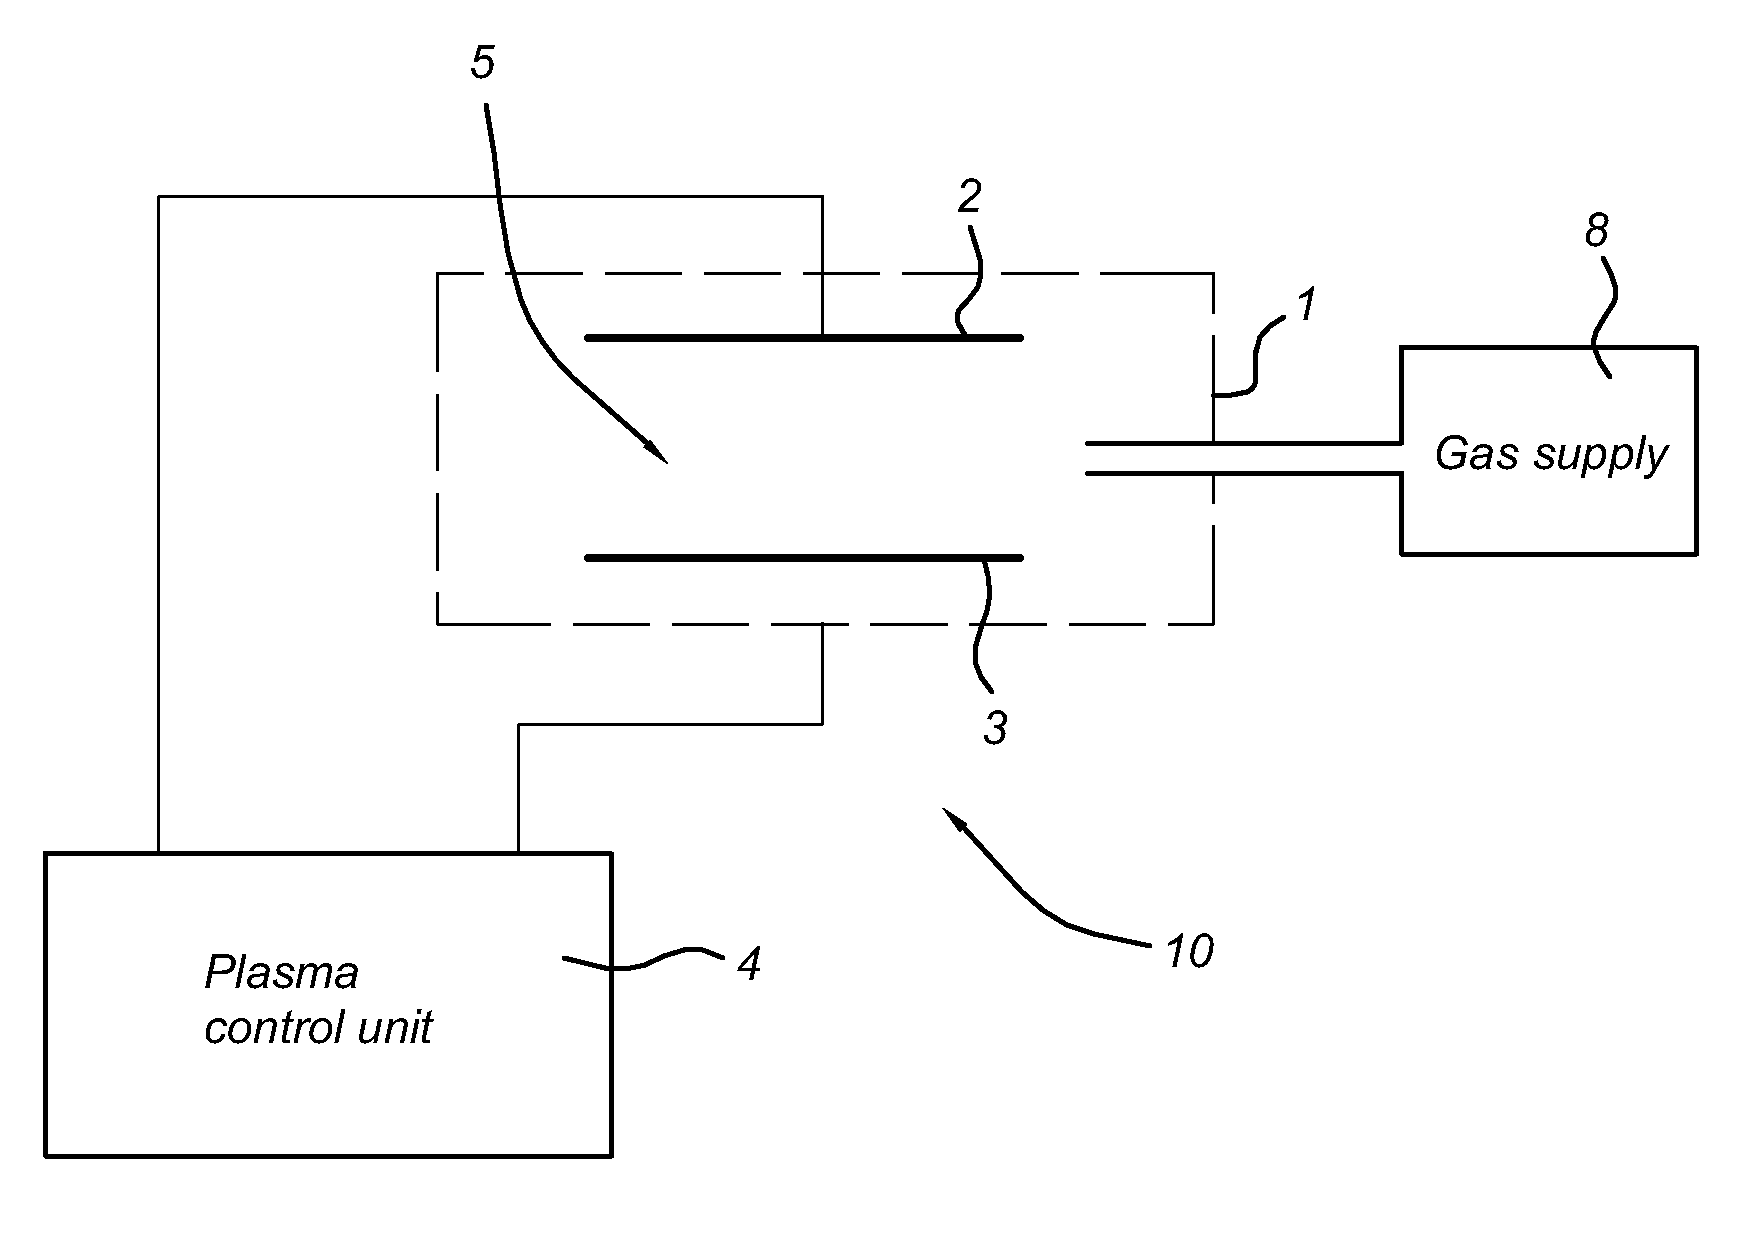 Plasma treatment apparatus and method for treatment of a substrate with atmospheric pressure glow discharge electrode configuration